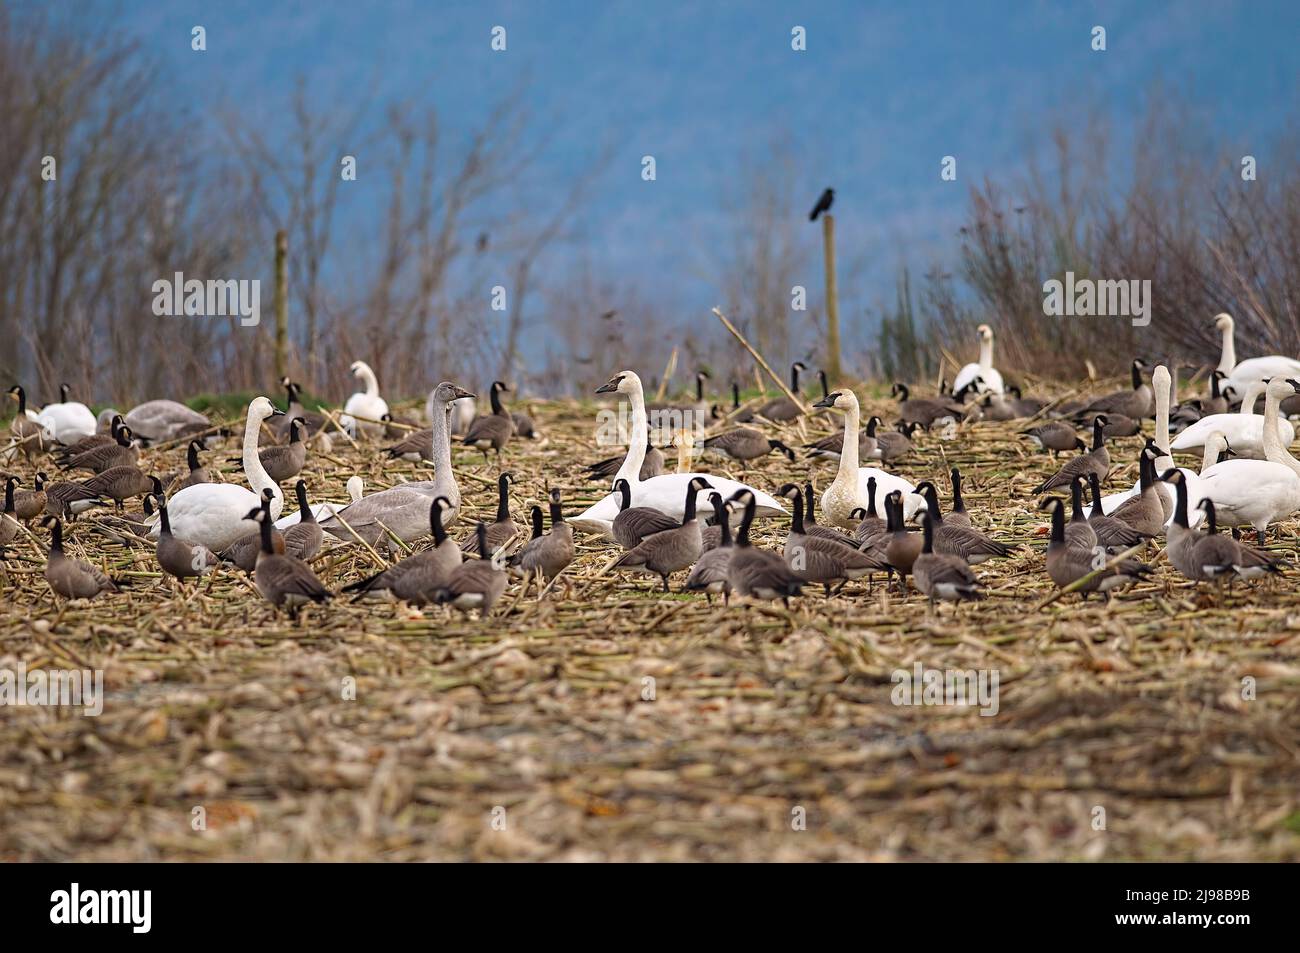 Trumpeter Swans (Cygnus buccinator) and Canada Geese (Branta canadensis) flocked together. Stock Photo